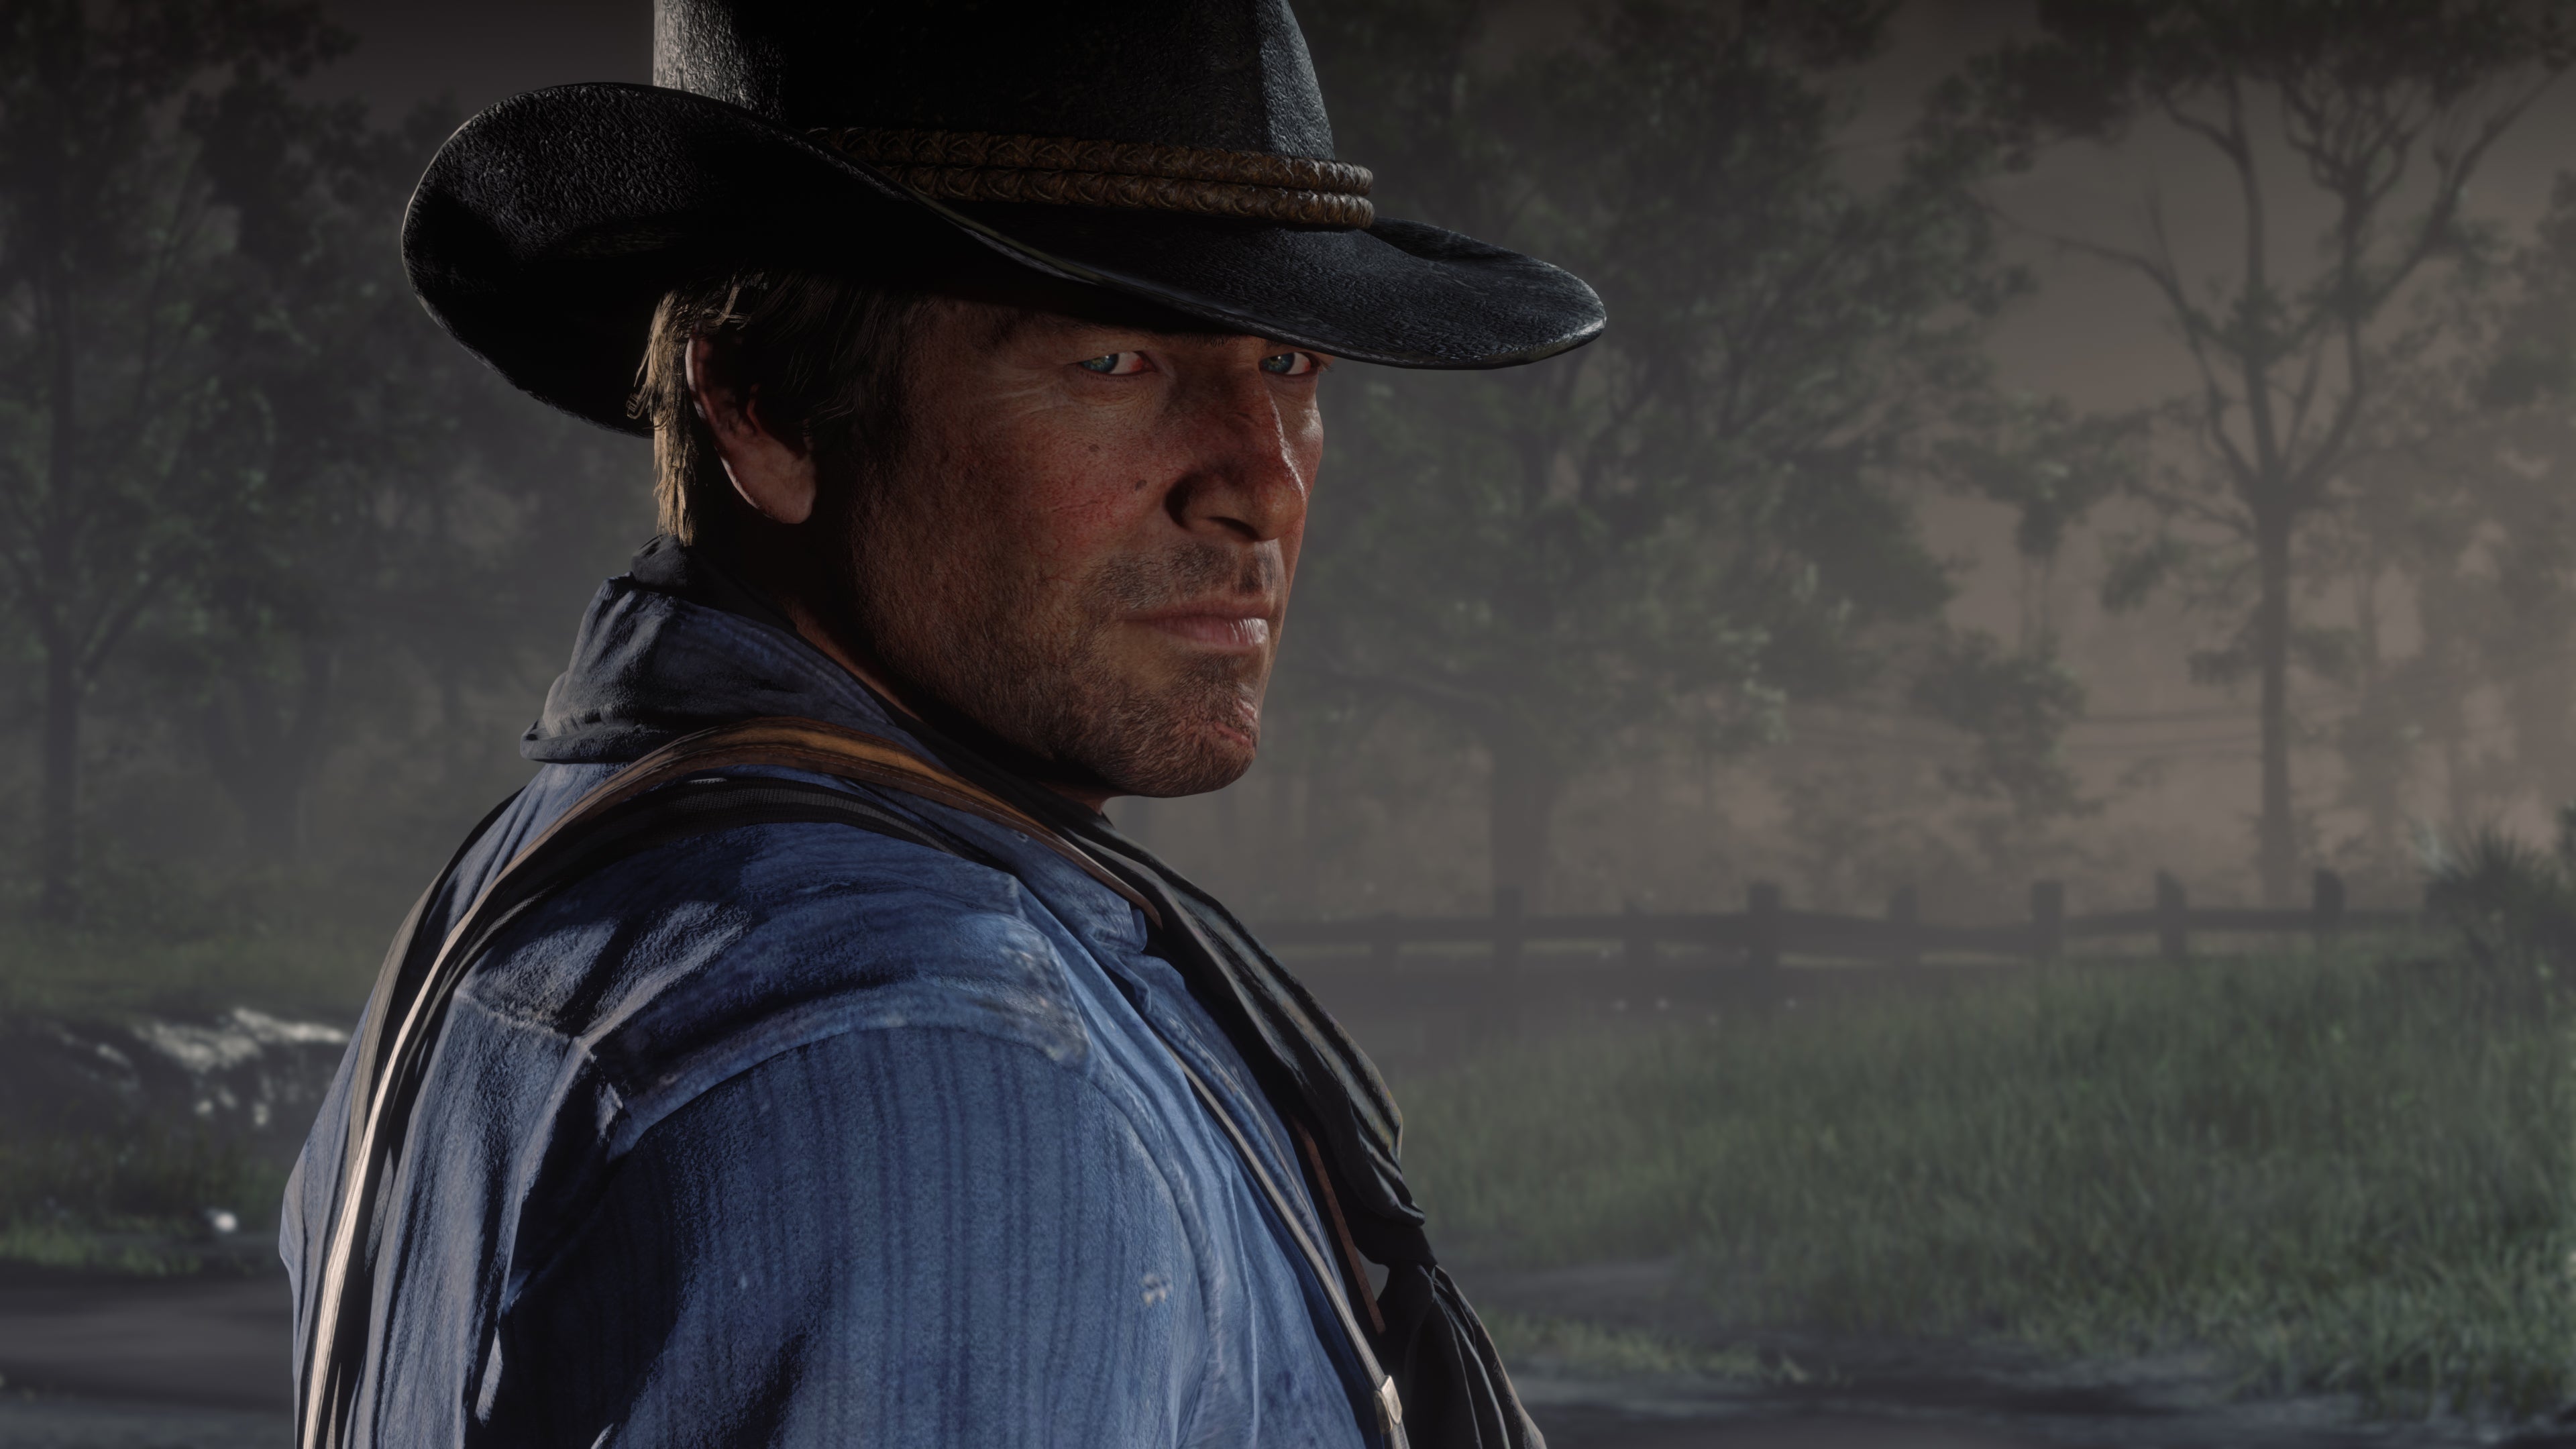 Image for Red Dead Redemption 2 PC content additions include new Bounty Hunting missions, horses, weapons, more